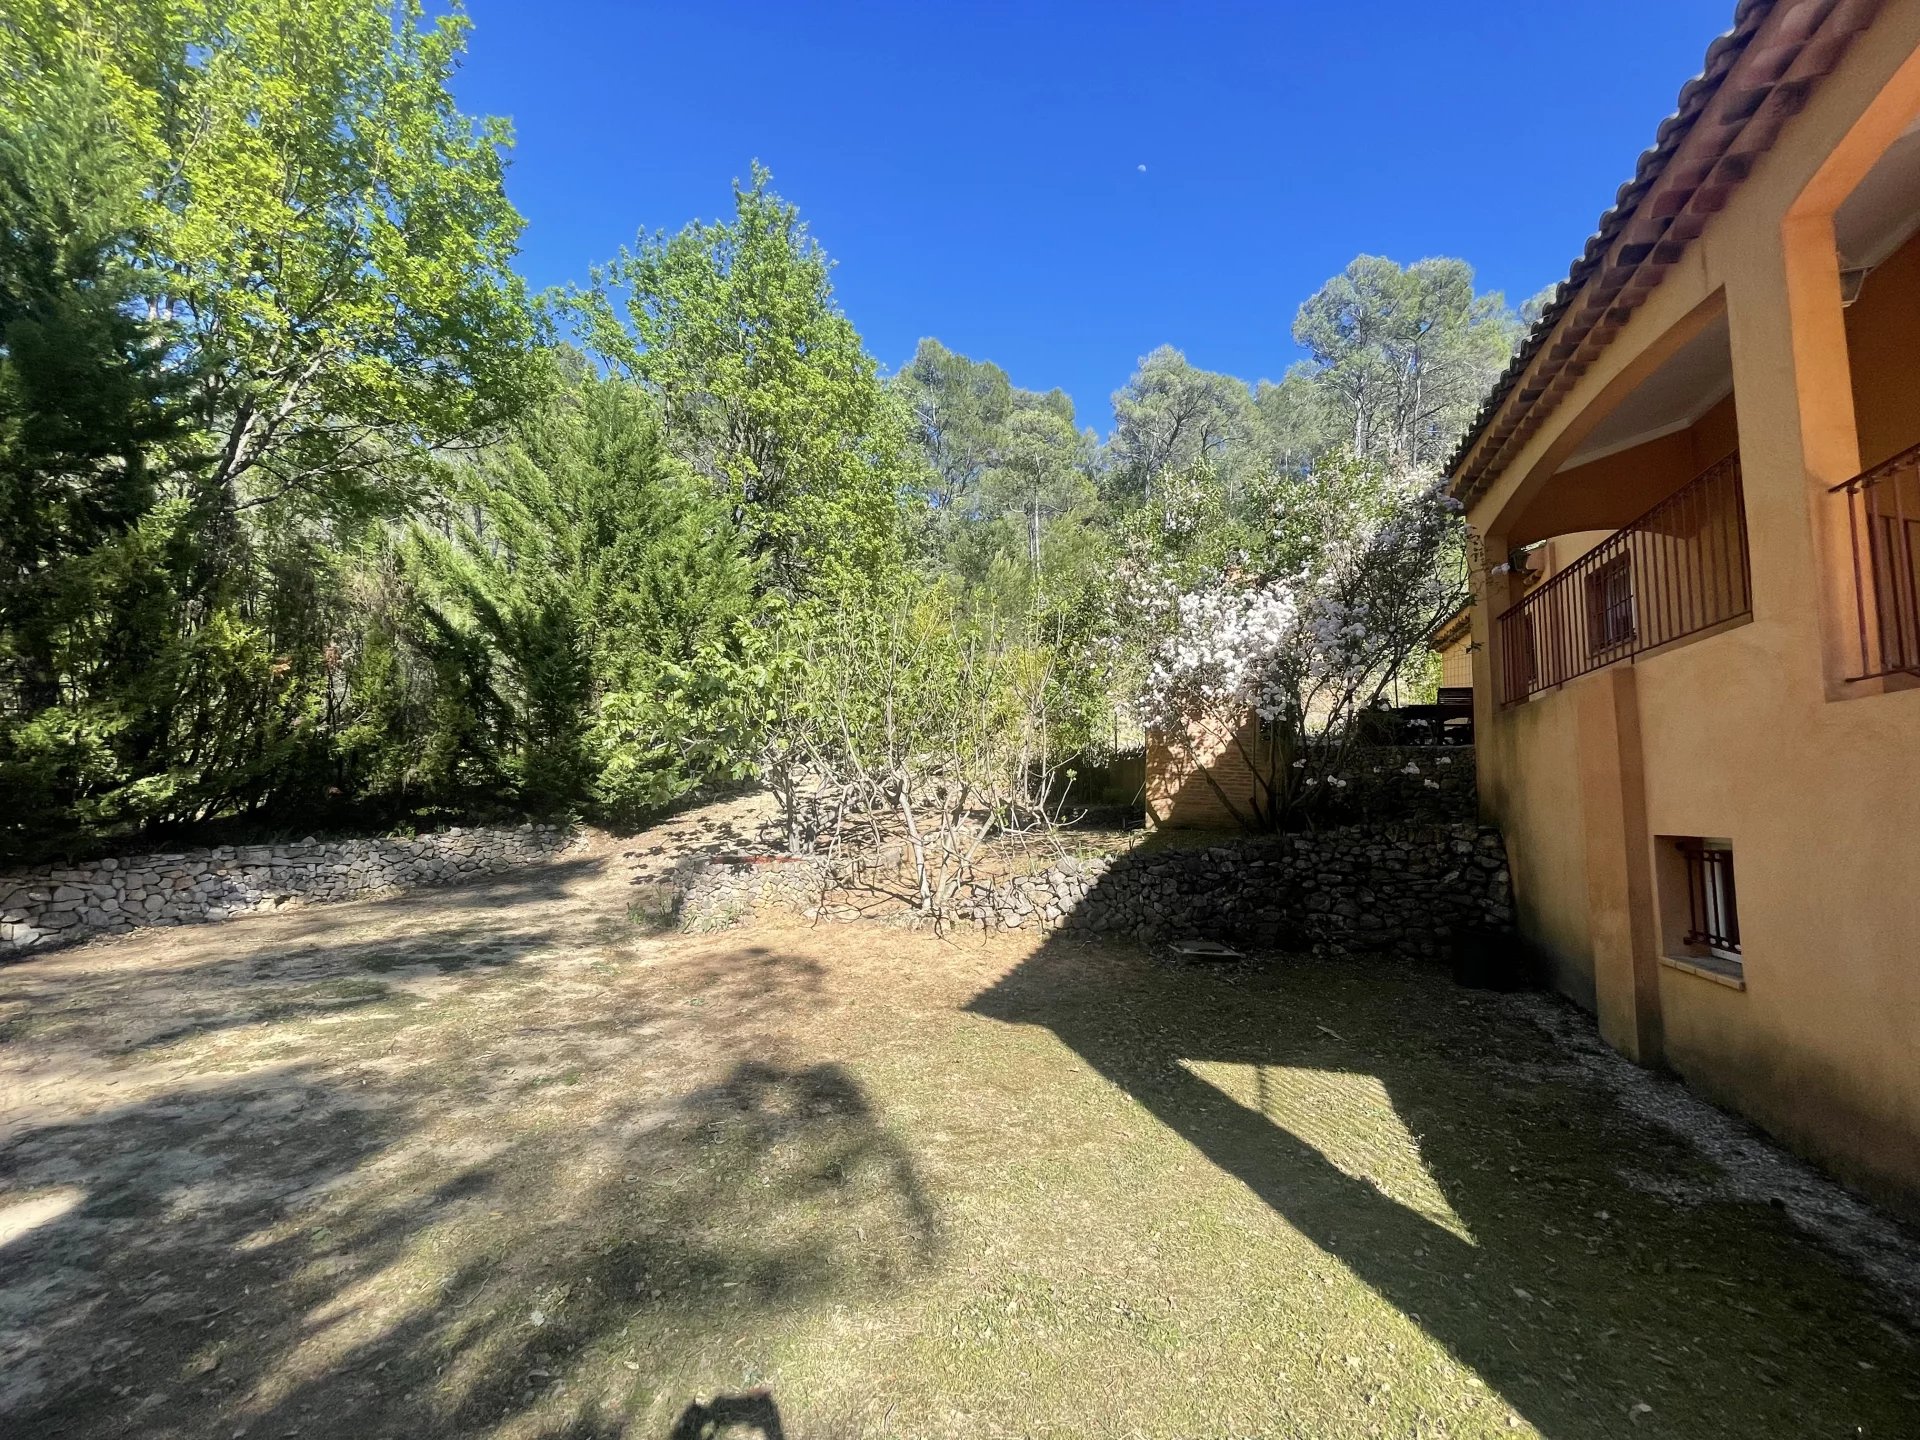 BARJOLS - 6-bedroom house with pool, separate guest house, on 8052 m² of preserved land, panoramic view